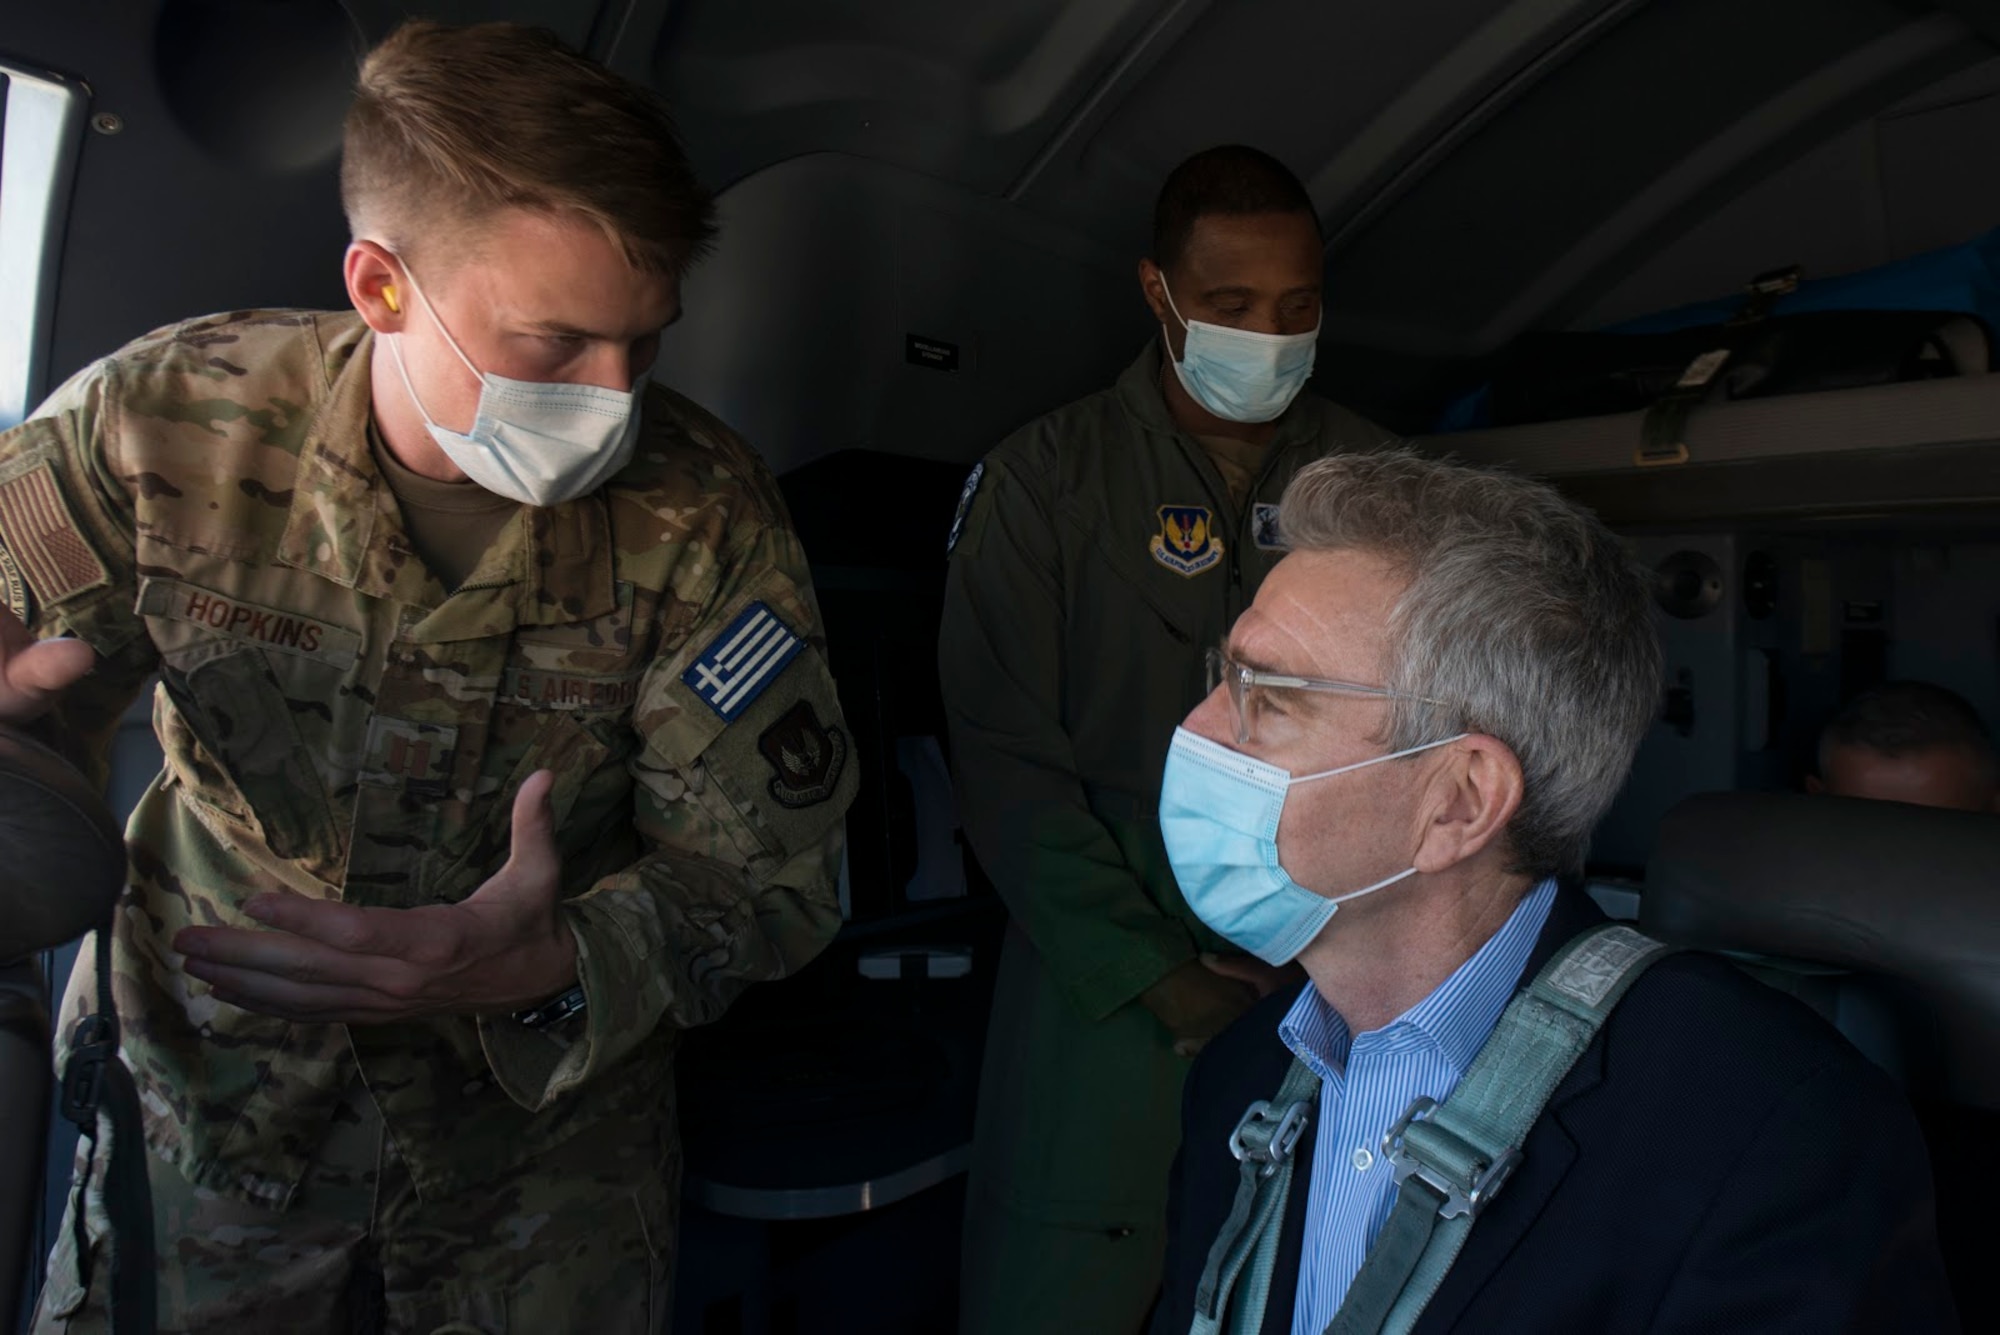 U.S. Air Force Capt. John Hopkins, 37th Airlift Squadron Operation Stolen Cerberus VII mission commander, left, speaks with Geoffrey R. Pyatt, U.S. ambassador to the Hellenic Republic, right, during Operation Stolen Cerberus VII at Elefsis Air Base, Greece, Sept. 11, 2020. U.S. ambassadors represent the government and work with their host nation to promote international relationships, trade, and military support. (U.S. Air Force photo by Airman 1st Class Taylor D. Slater)